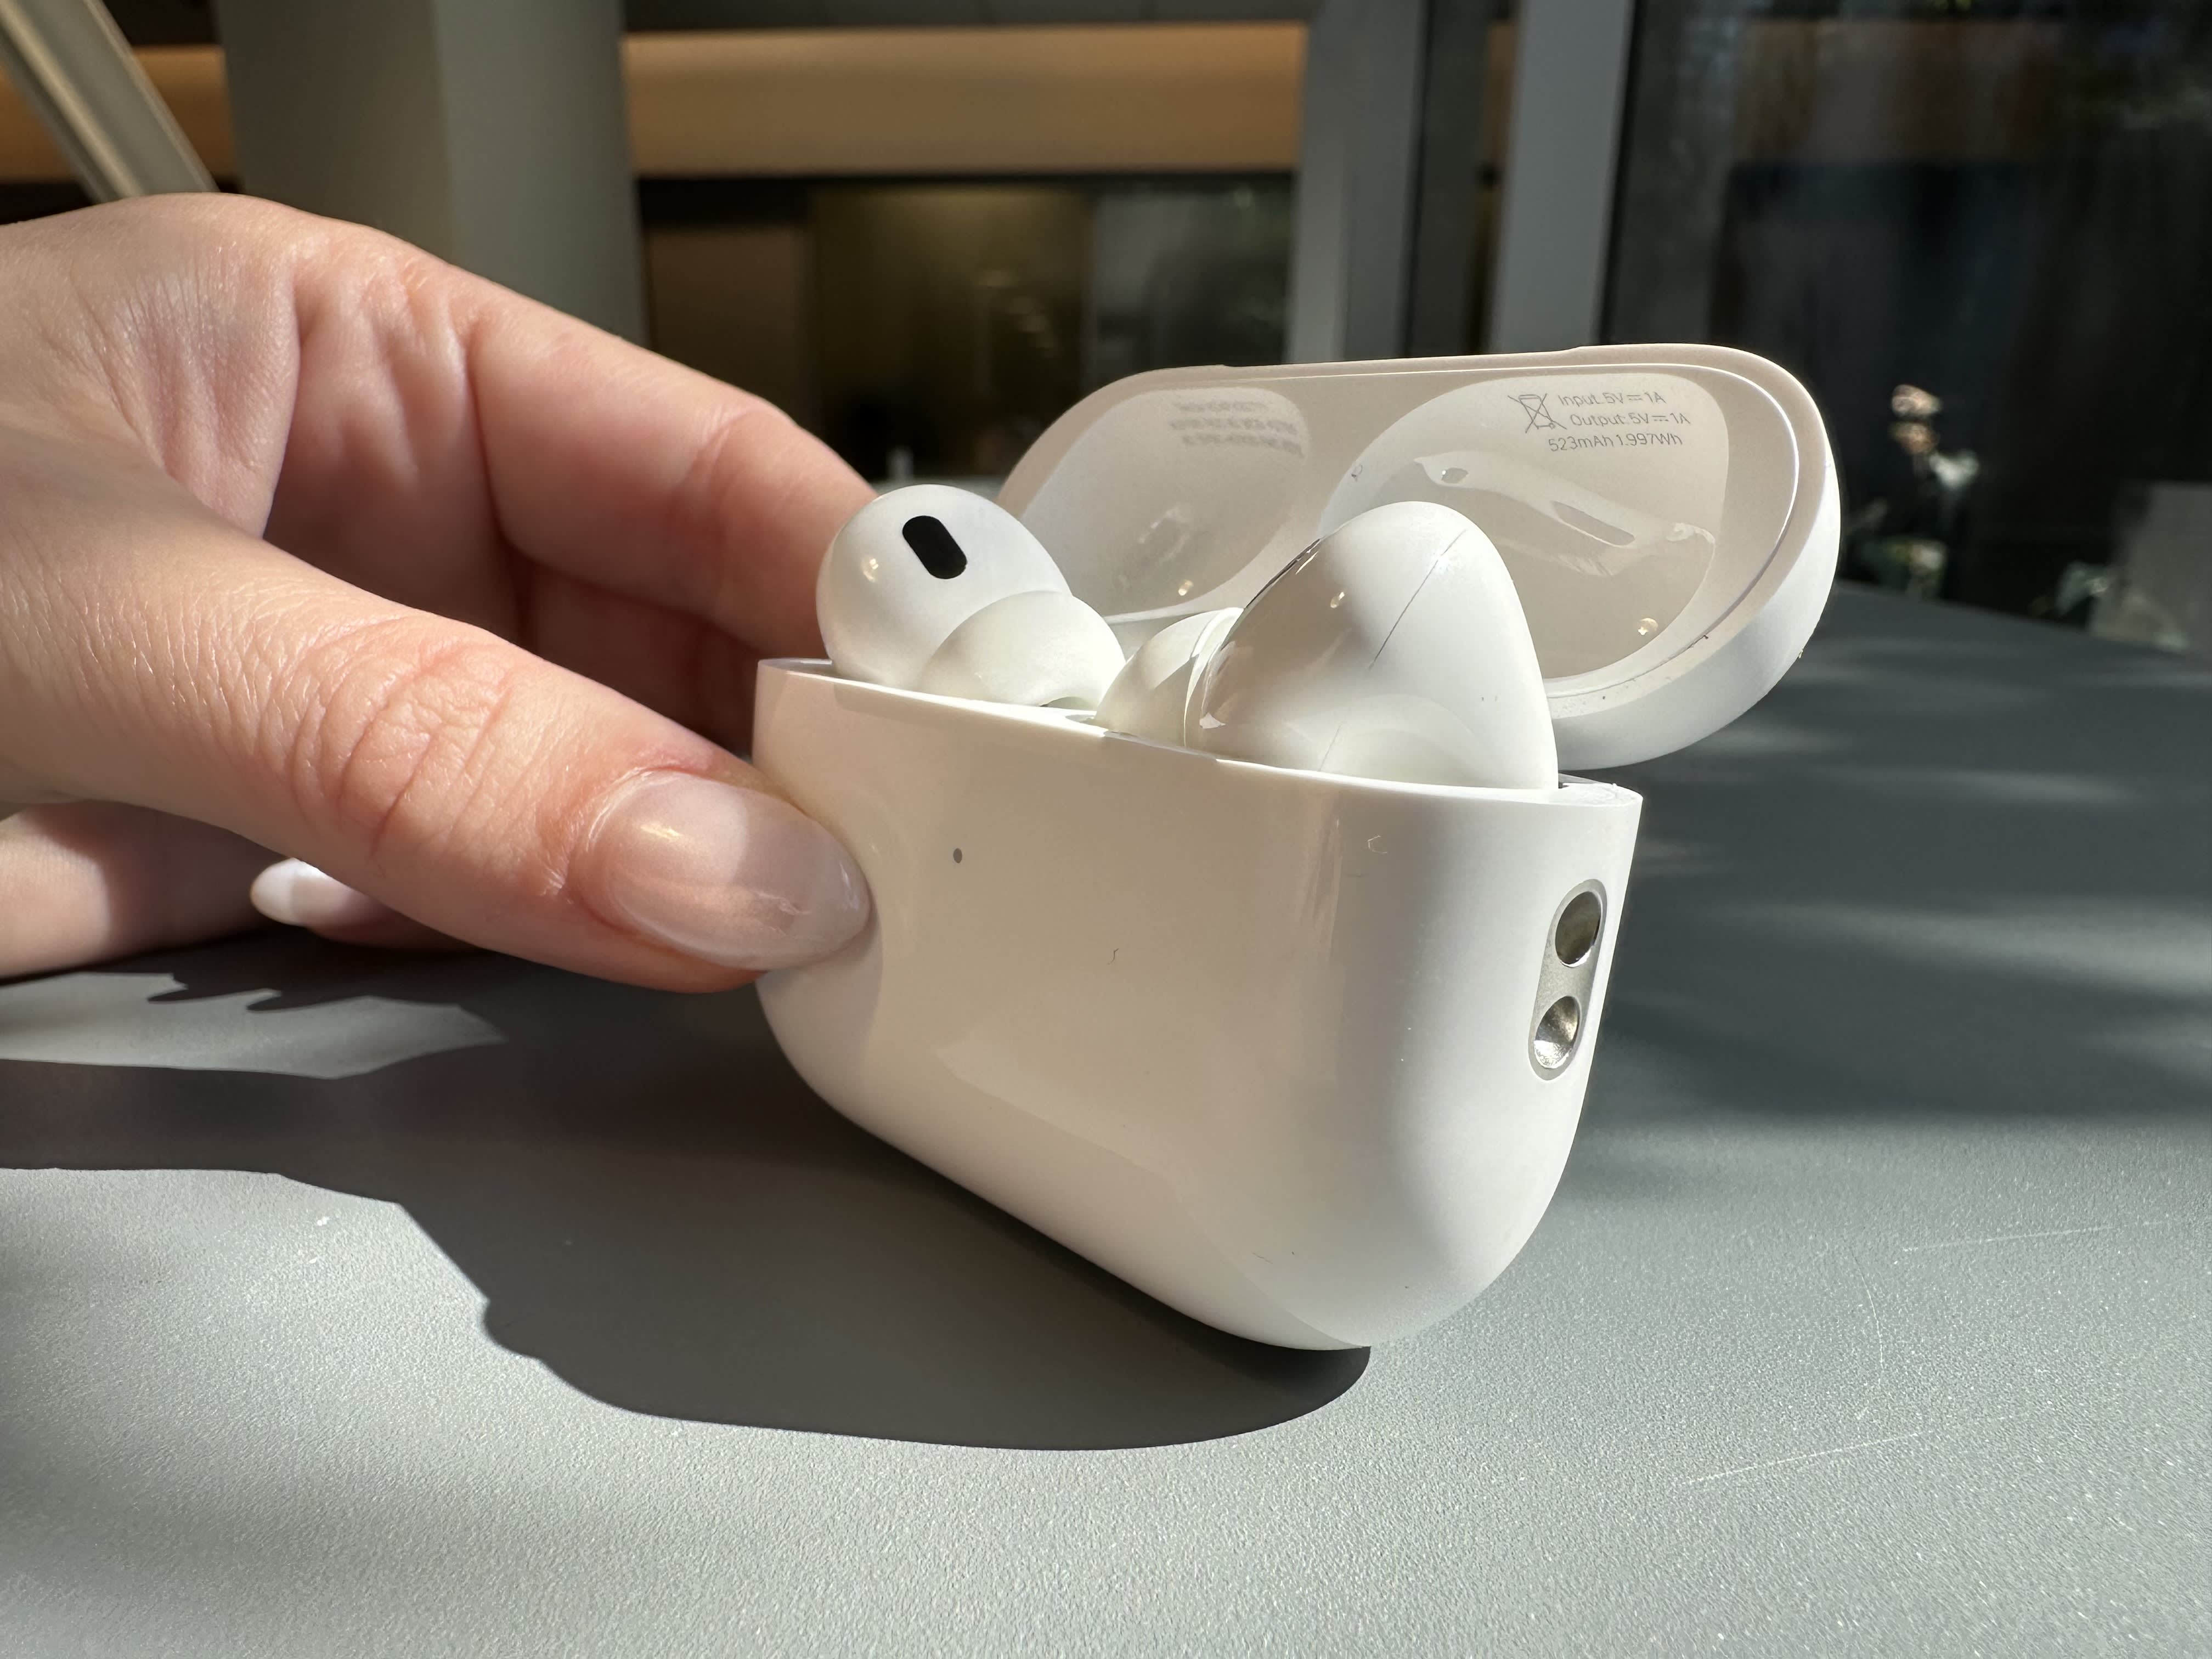 New AirPods Pro review: A must buy, even if you have the older Pros